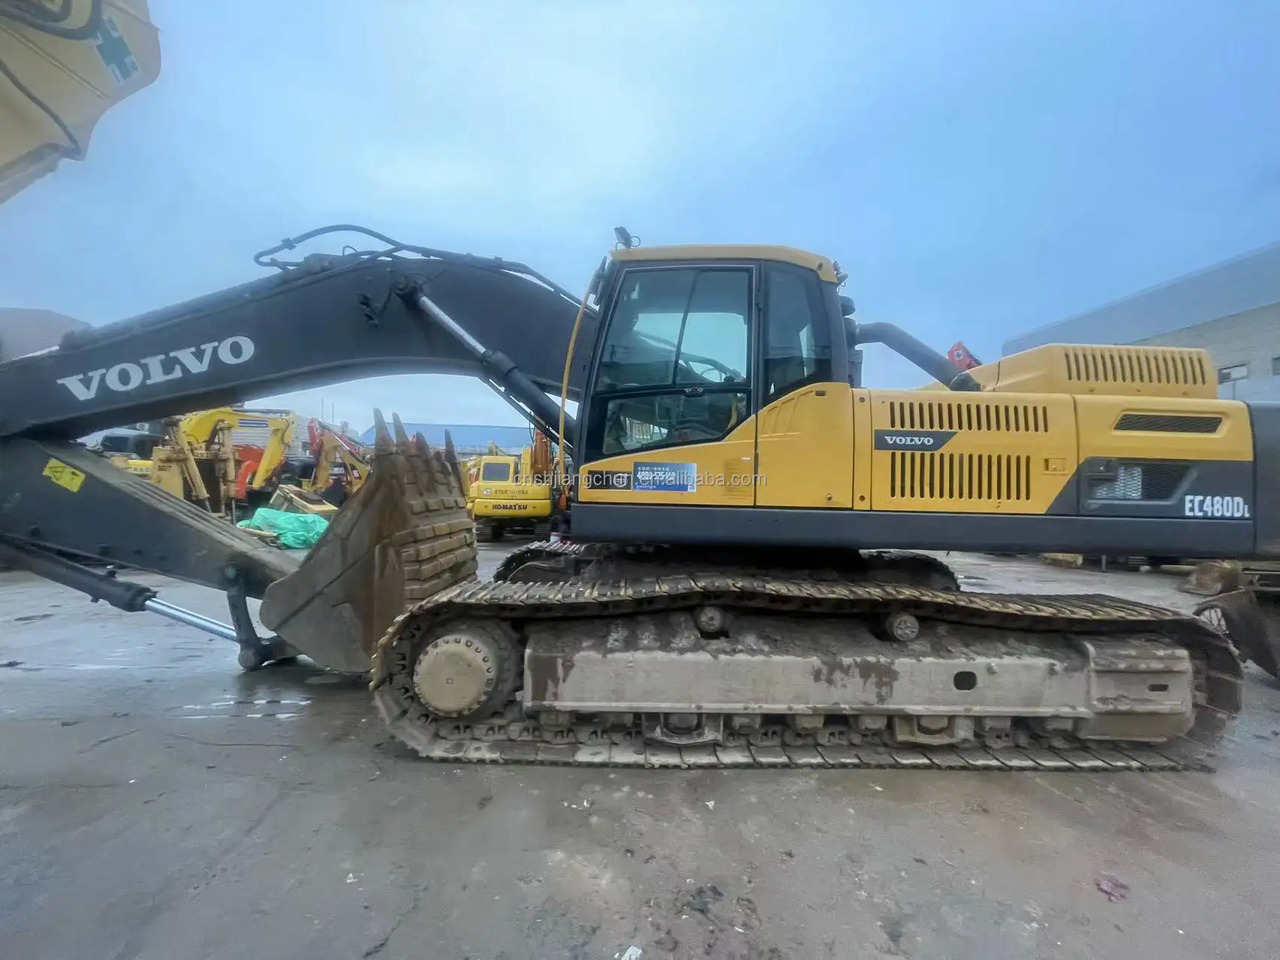 Máy xúc bánh xích second hand  hot selling Excavator construction machinery parts used excavator used  Volvo EC480D  in stock for sale: hình 6